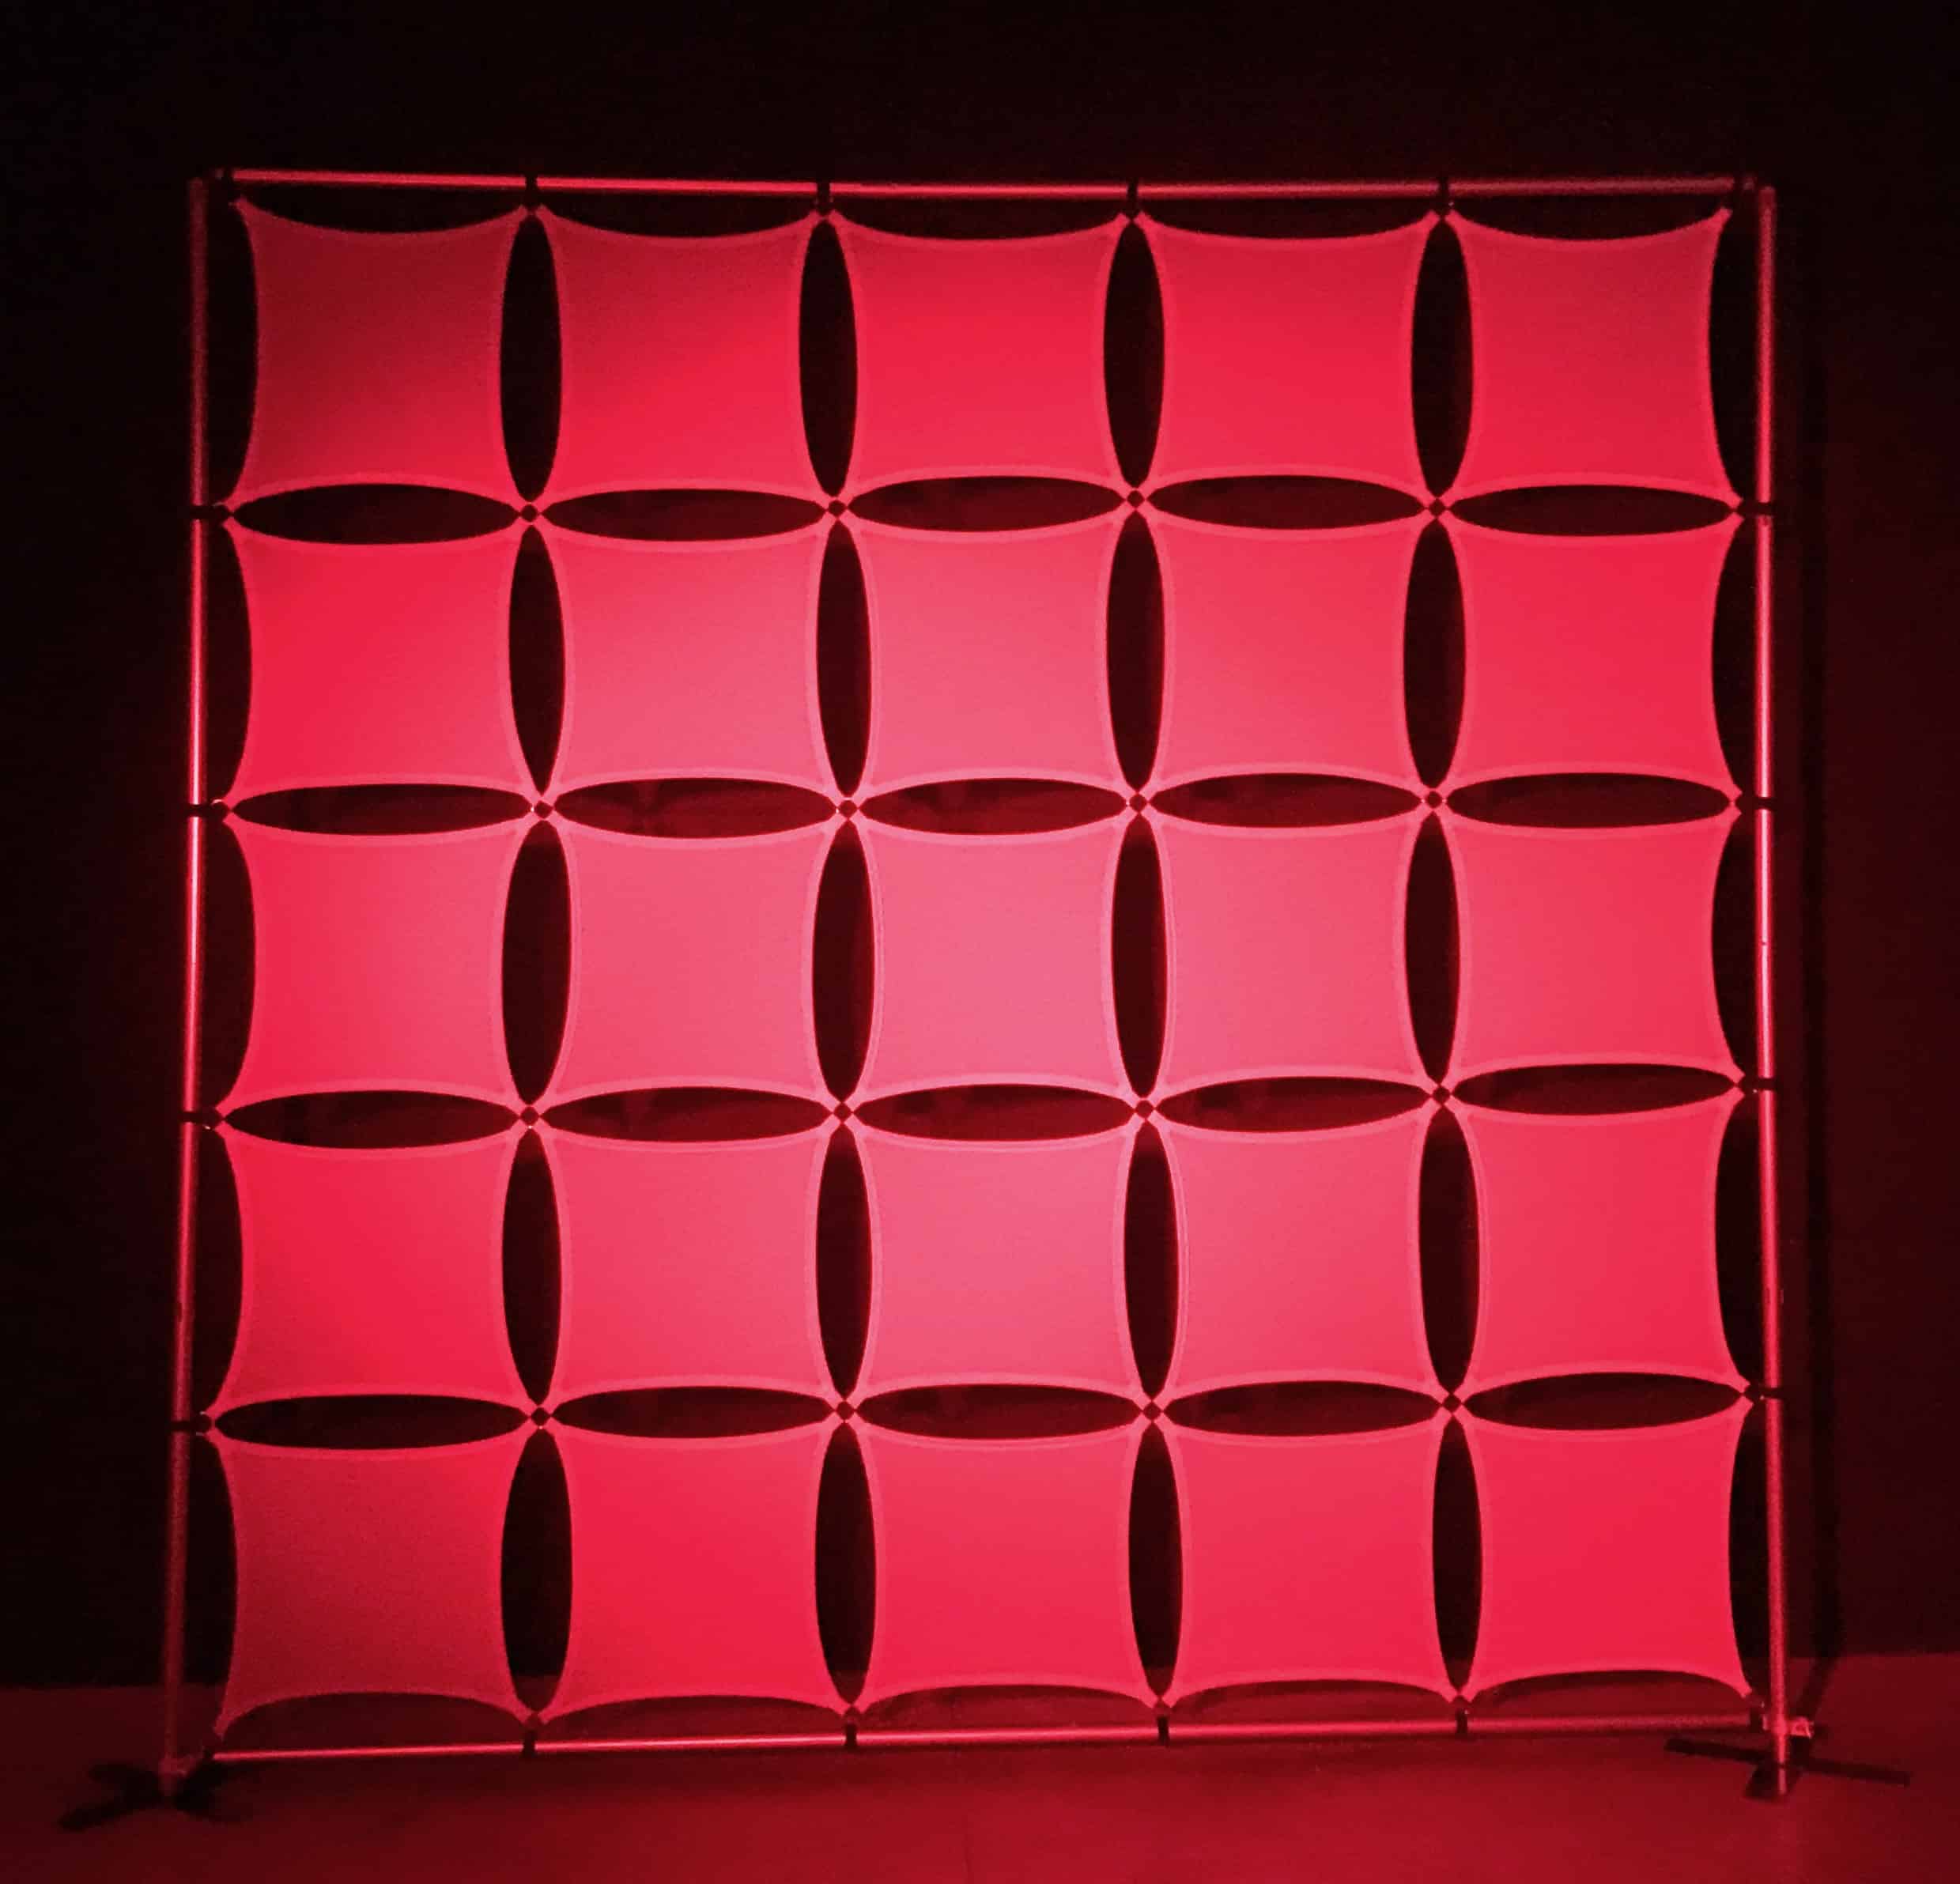 10x10 Ft Square Panel Wall - With Frame - StretchyScreens